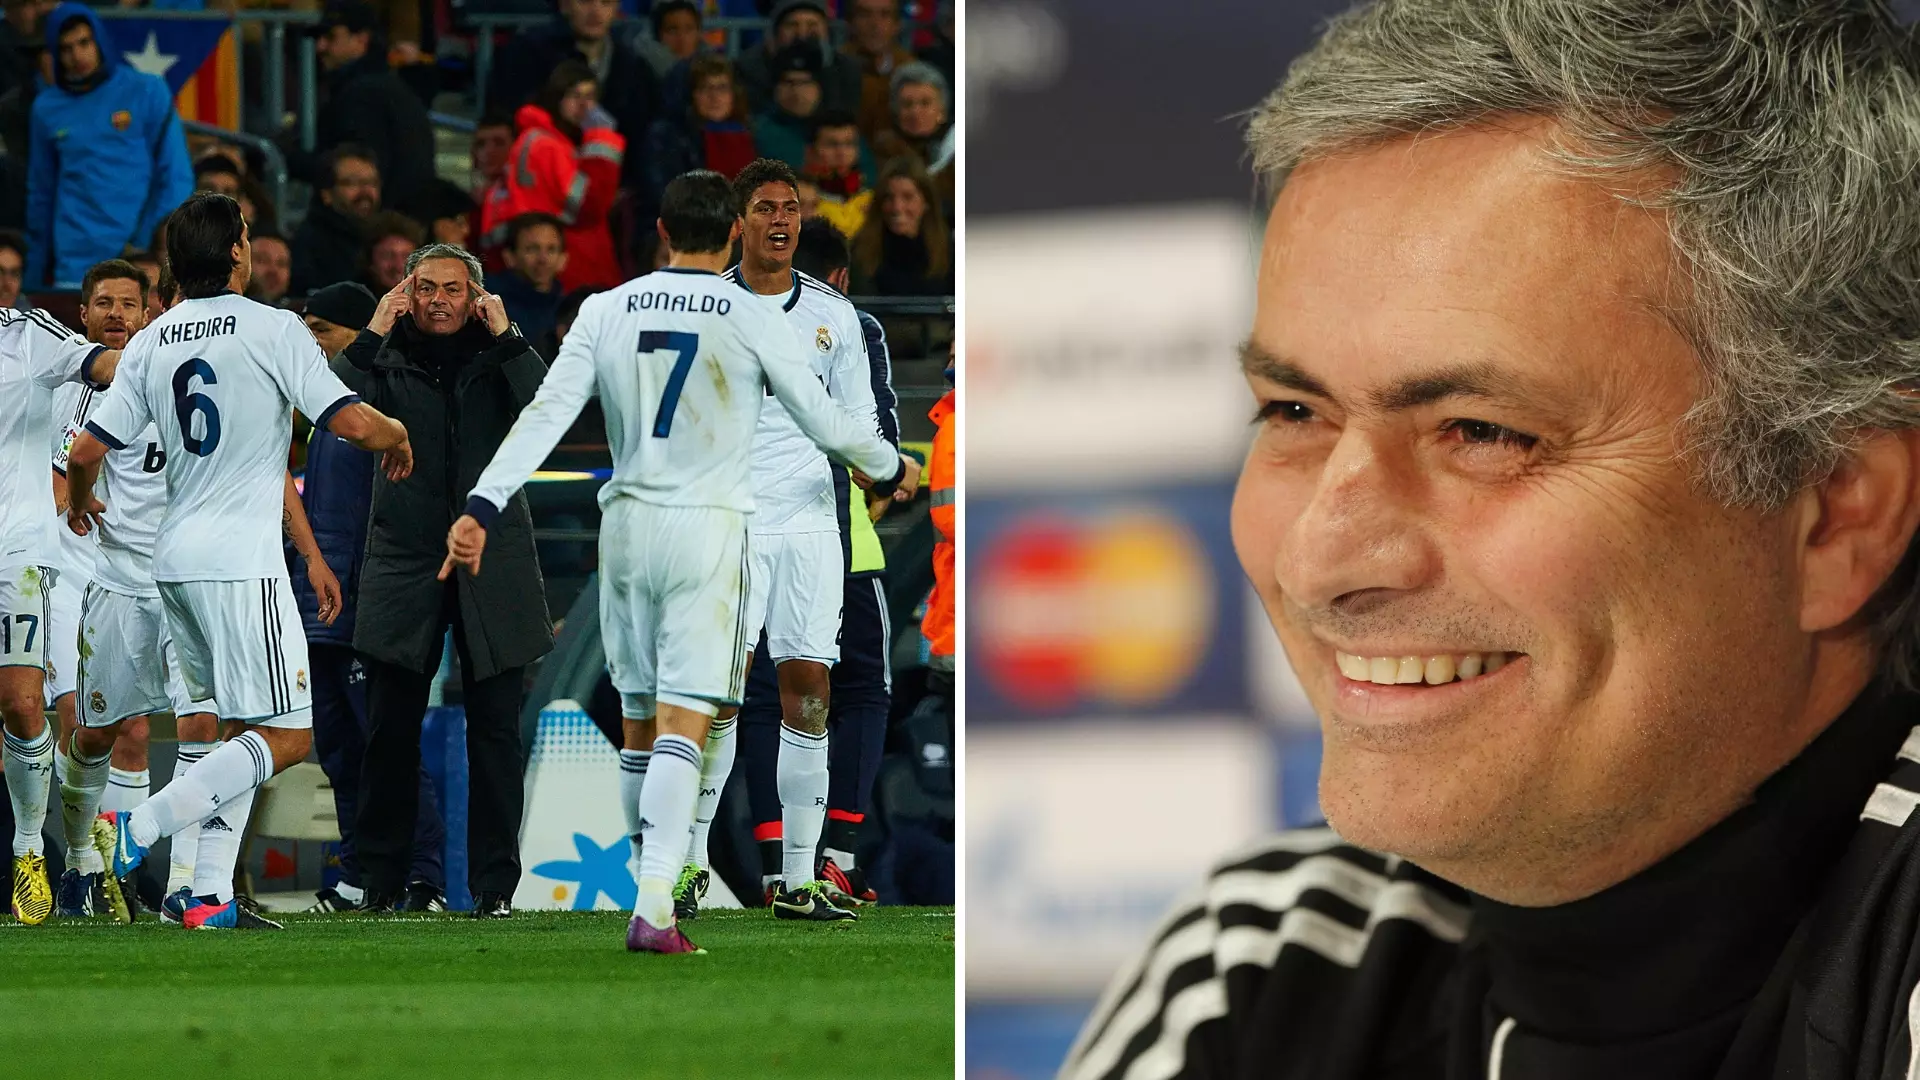 What Mourinho Said To Real Madrid Players After 5-0 Loss Proves His True Class